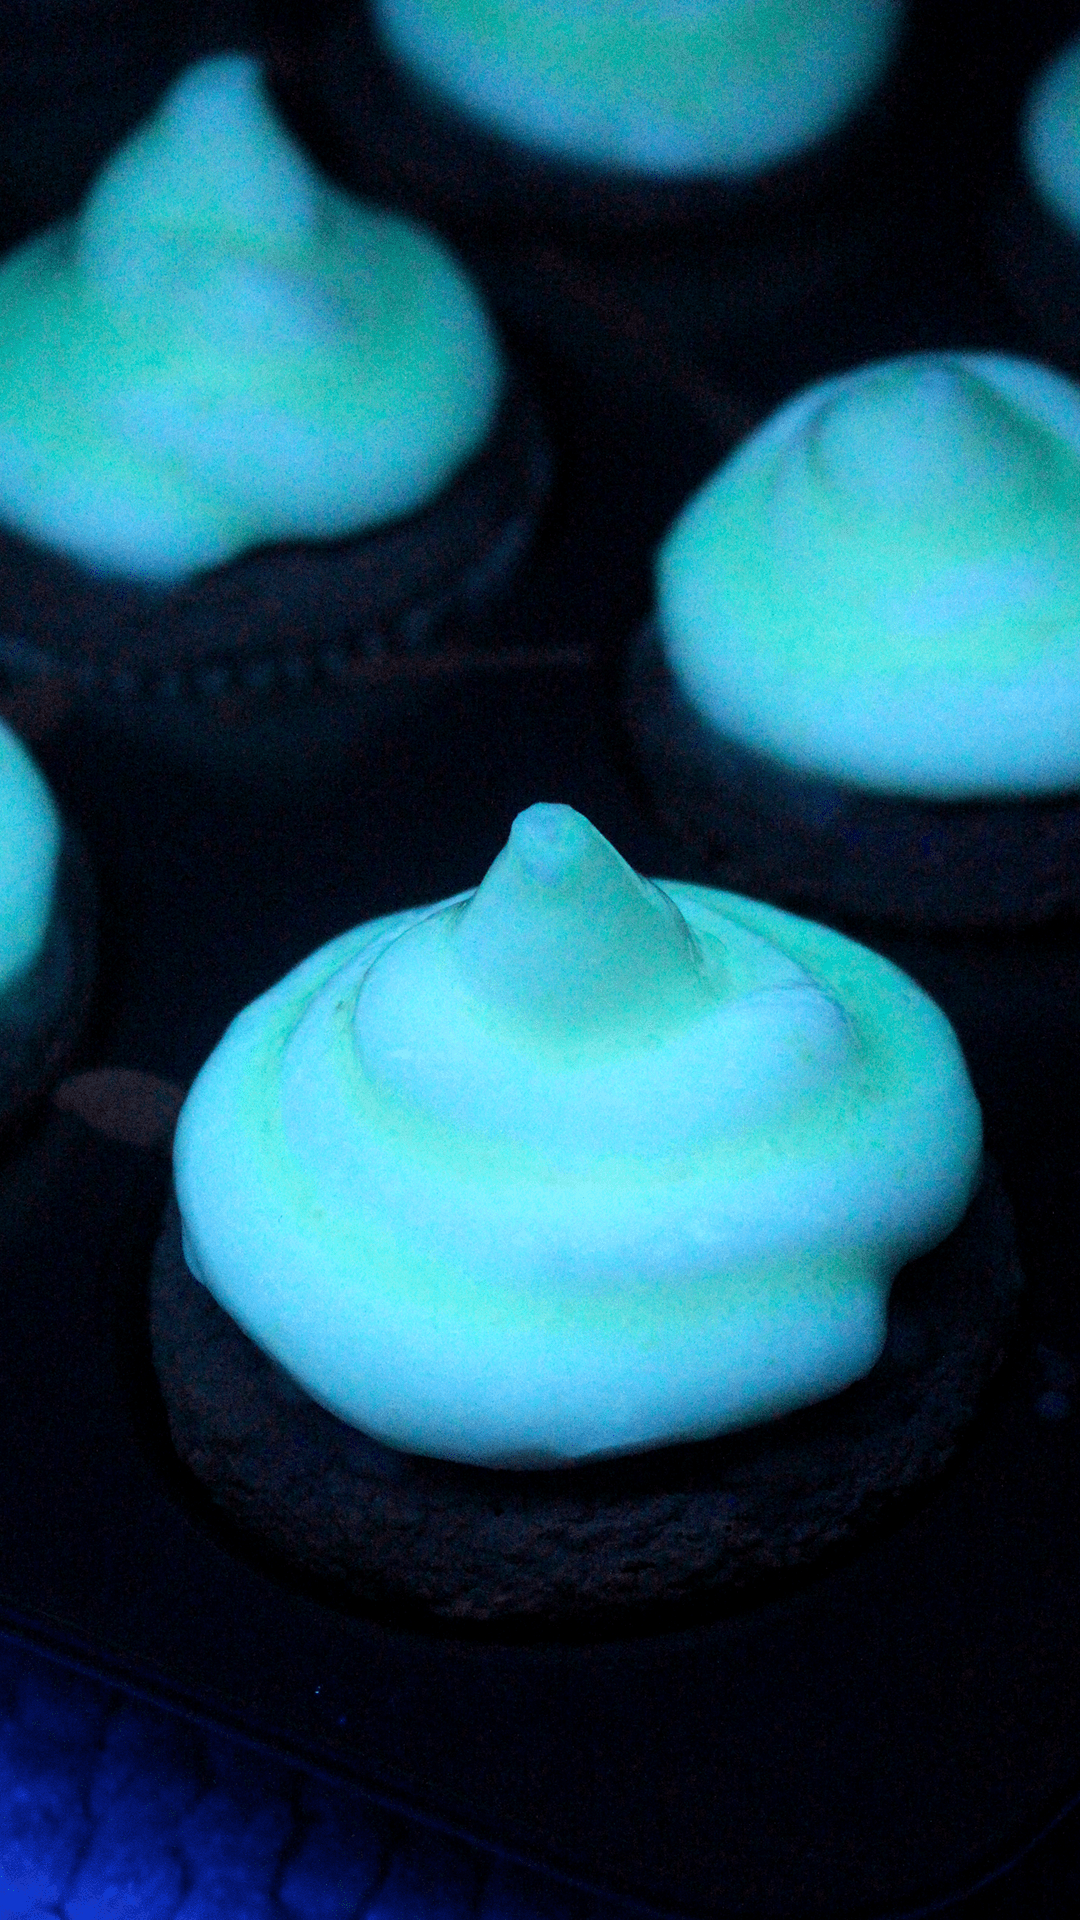 How to make colour changing UV Glow in the dark Cupcakes 